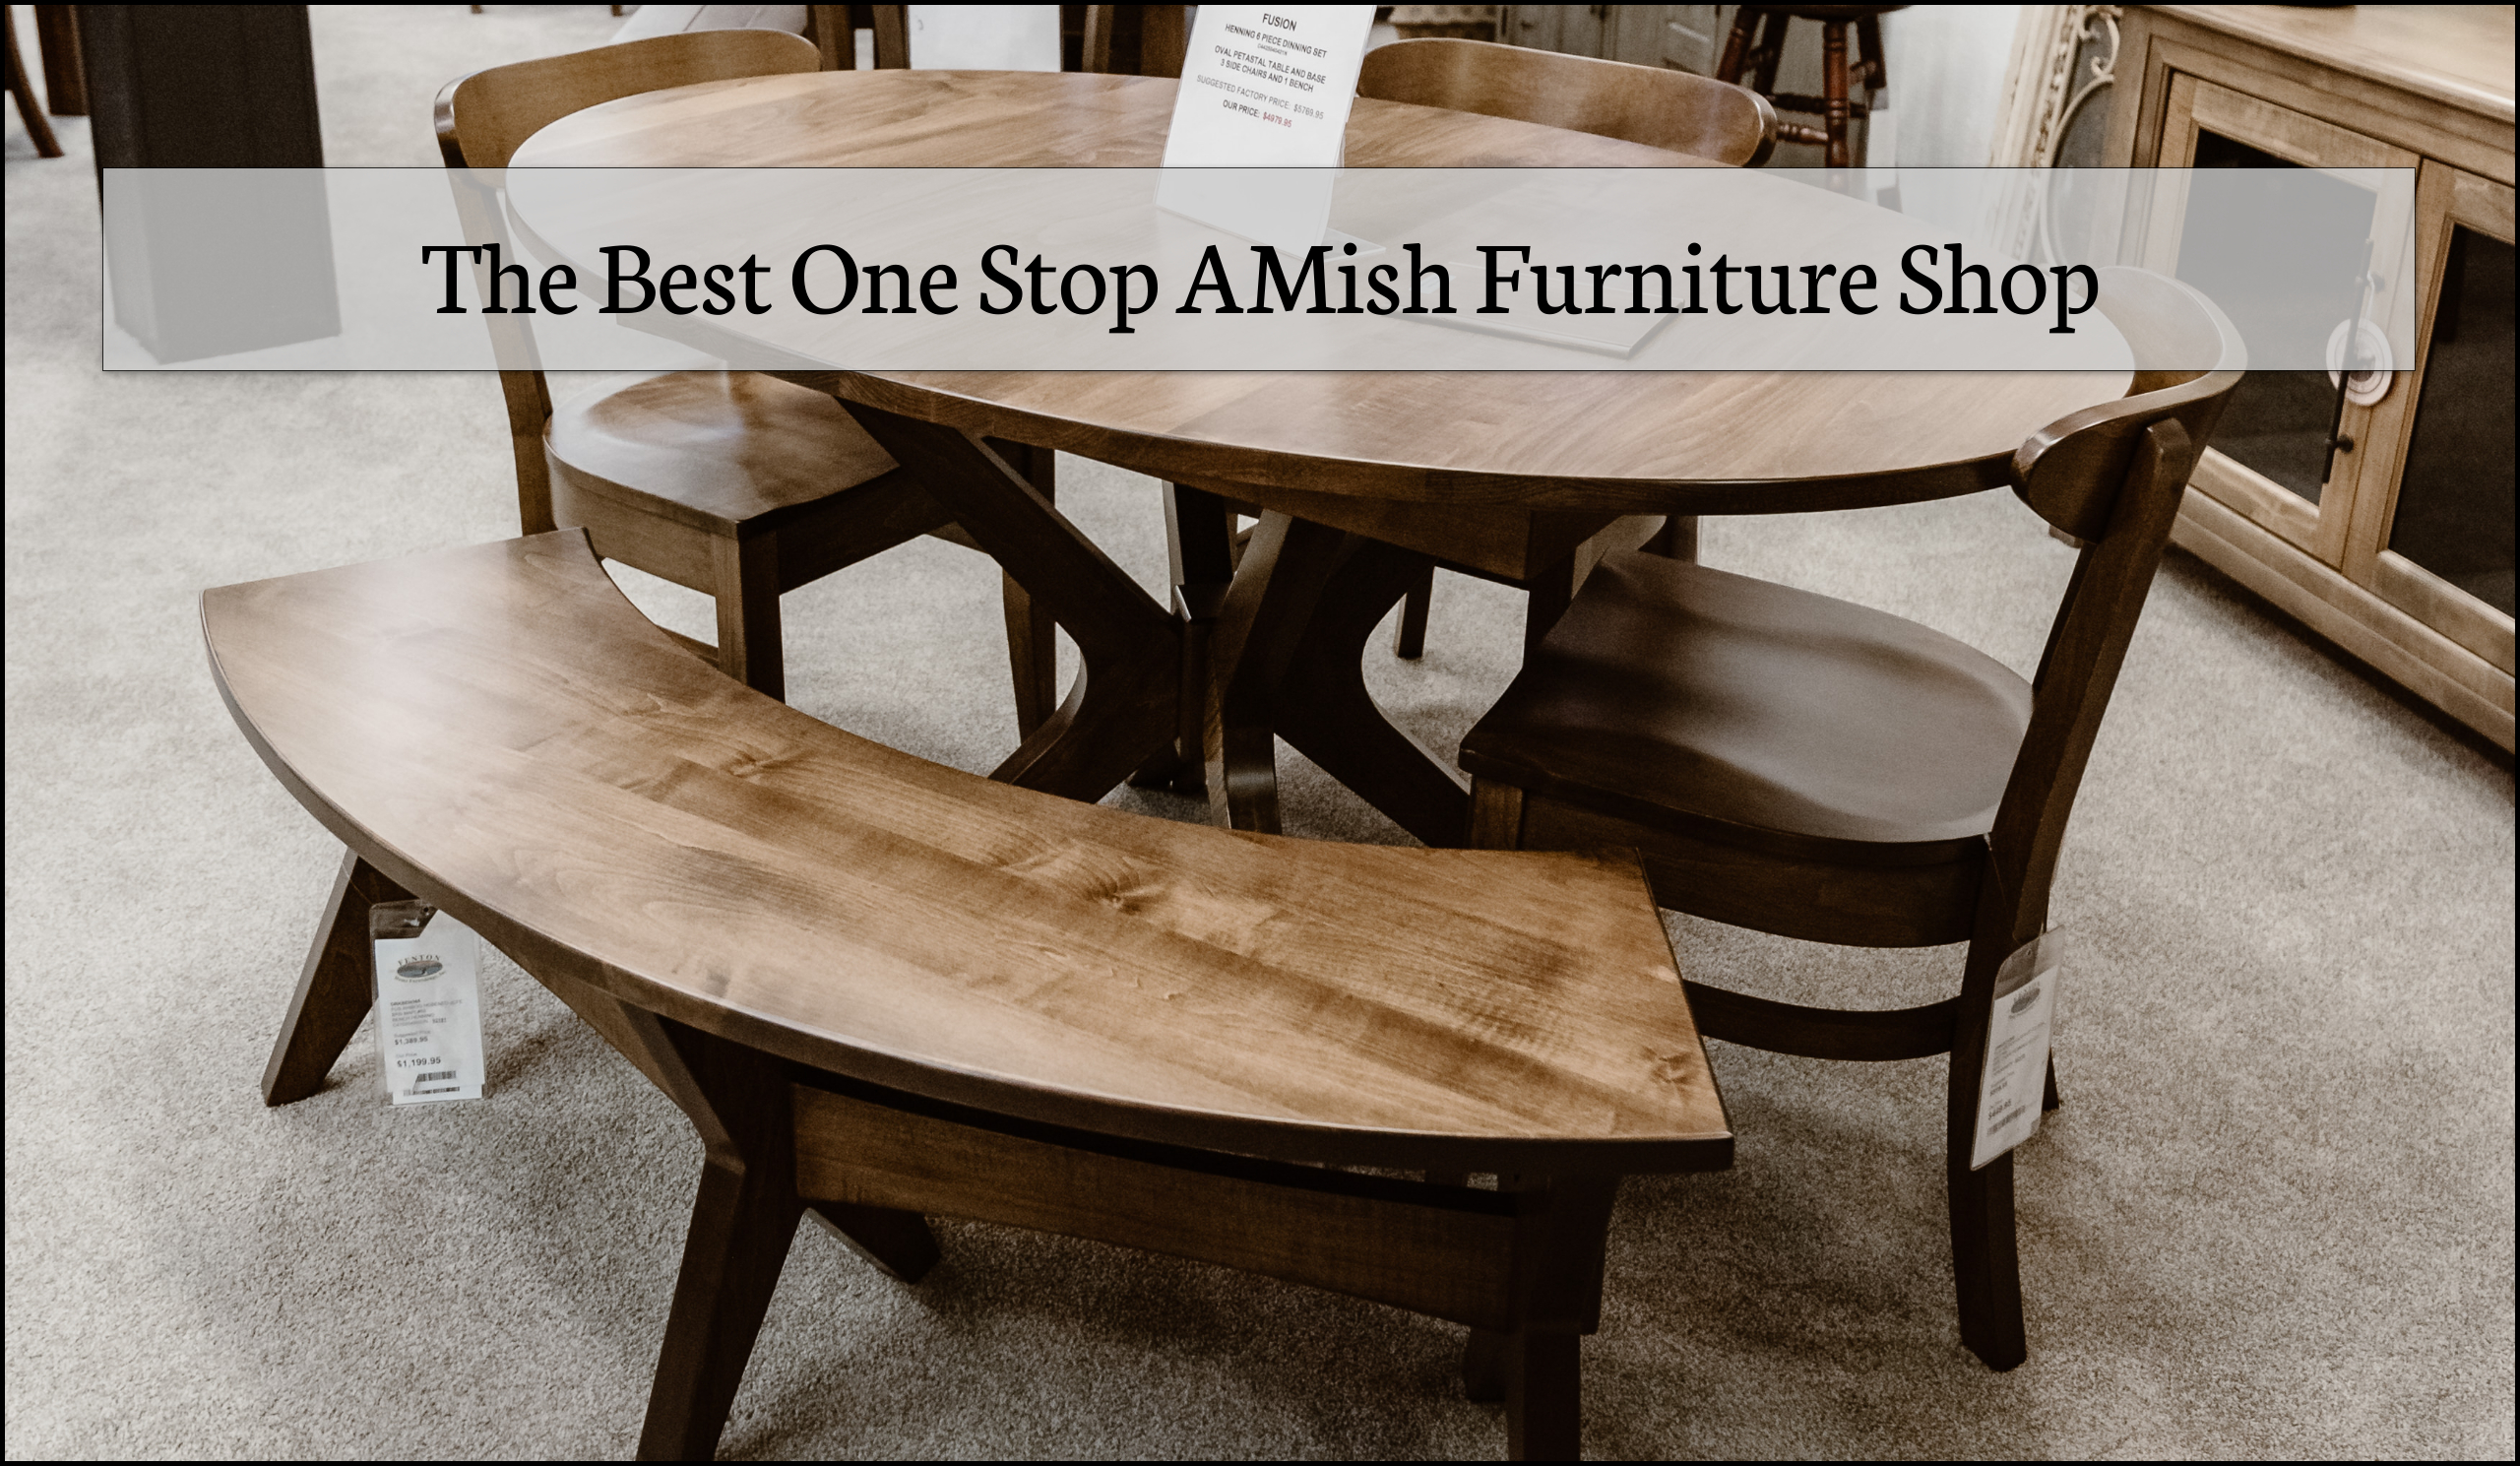 Learn Why Fentonn Home Furnishings Is Your One Stop for Amish Furniture In Michigan – Nov. 2021